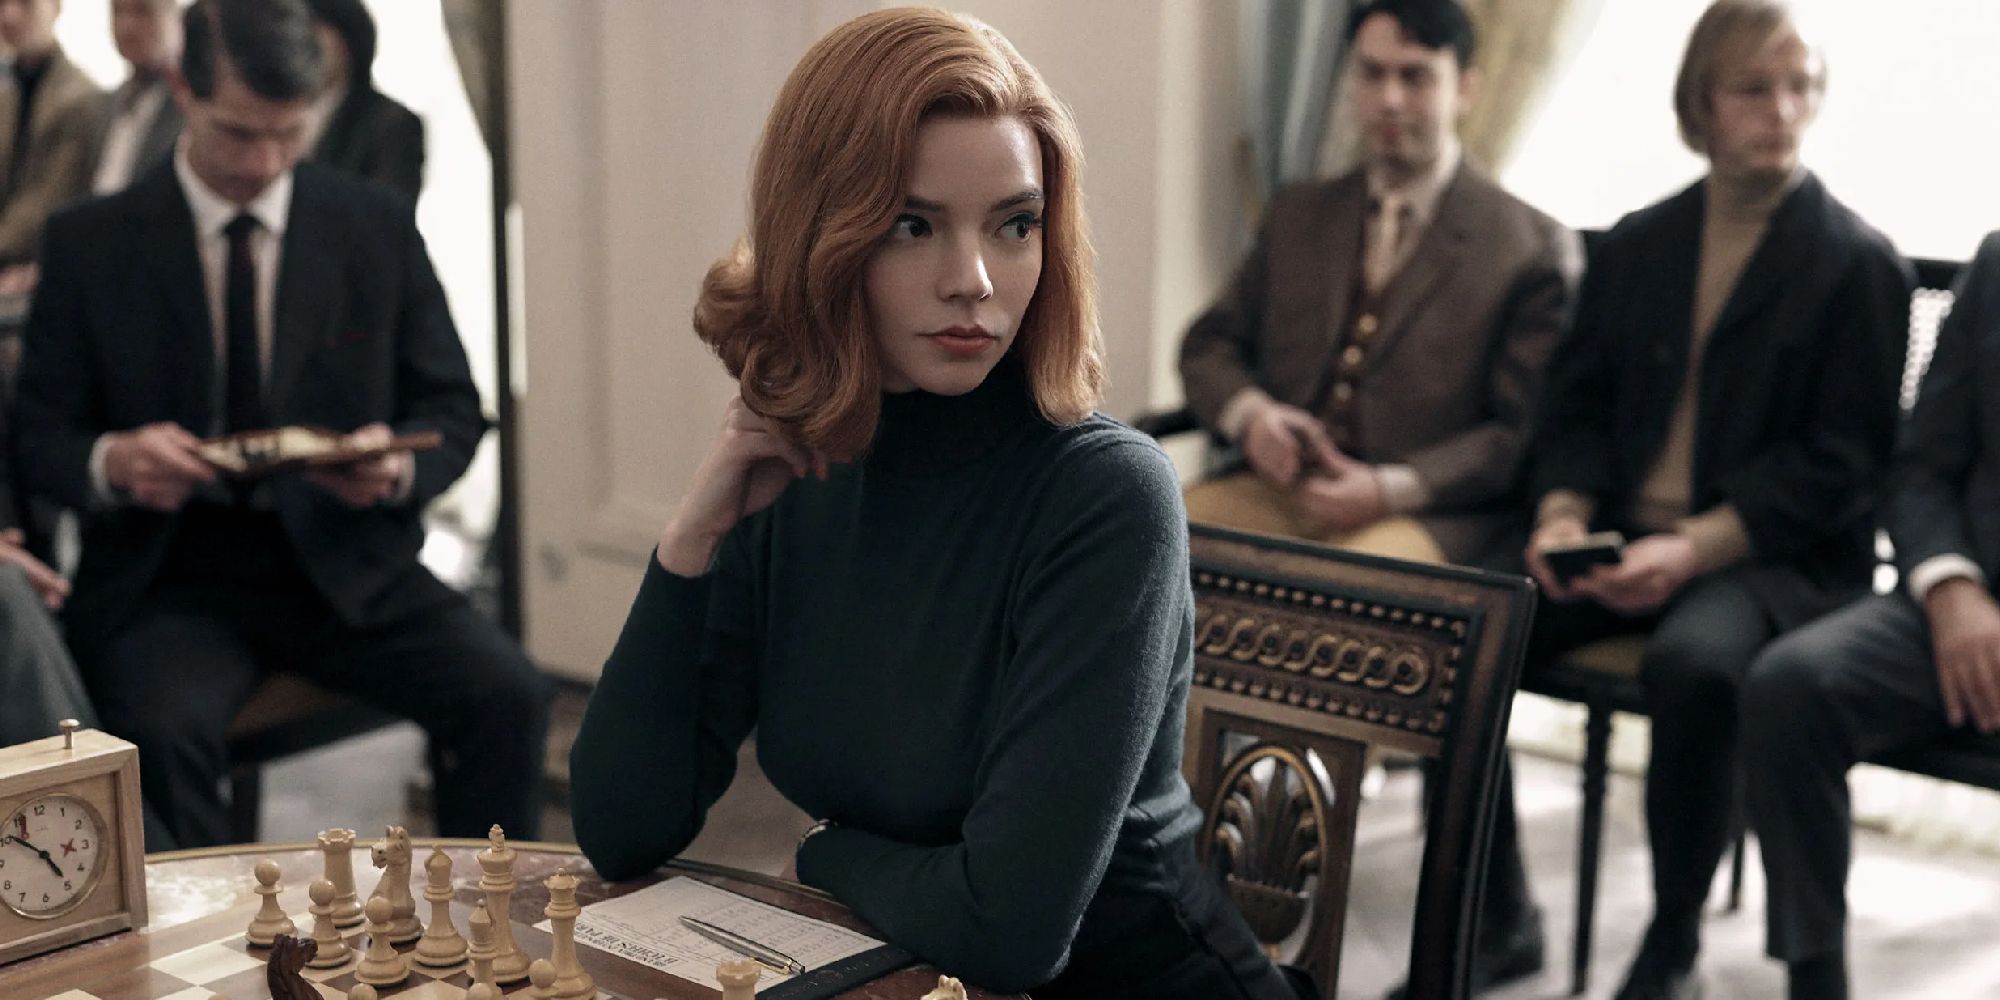 Anya Taylor-Joy as Beth Harmon sitting at a chess match in The Queen's Gambit.